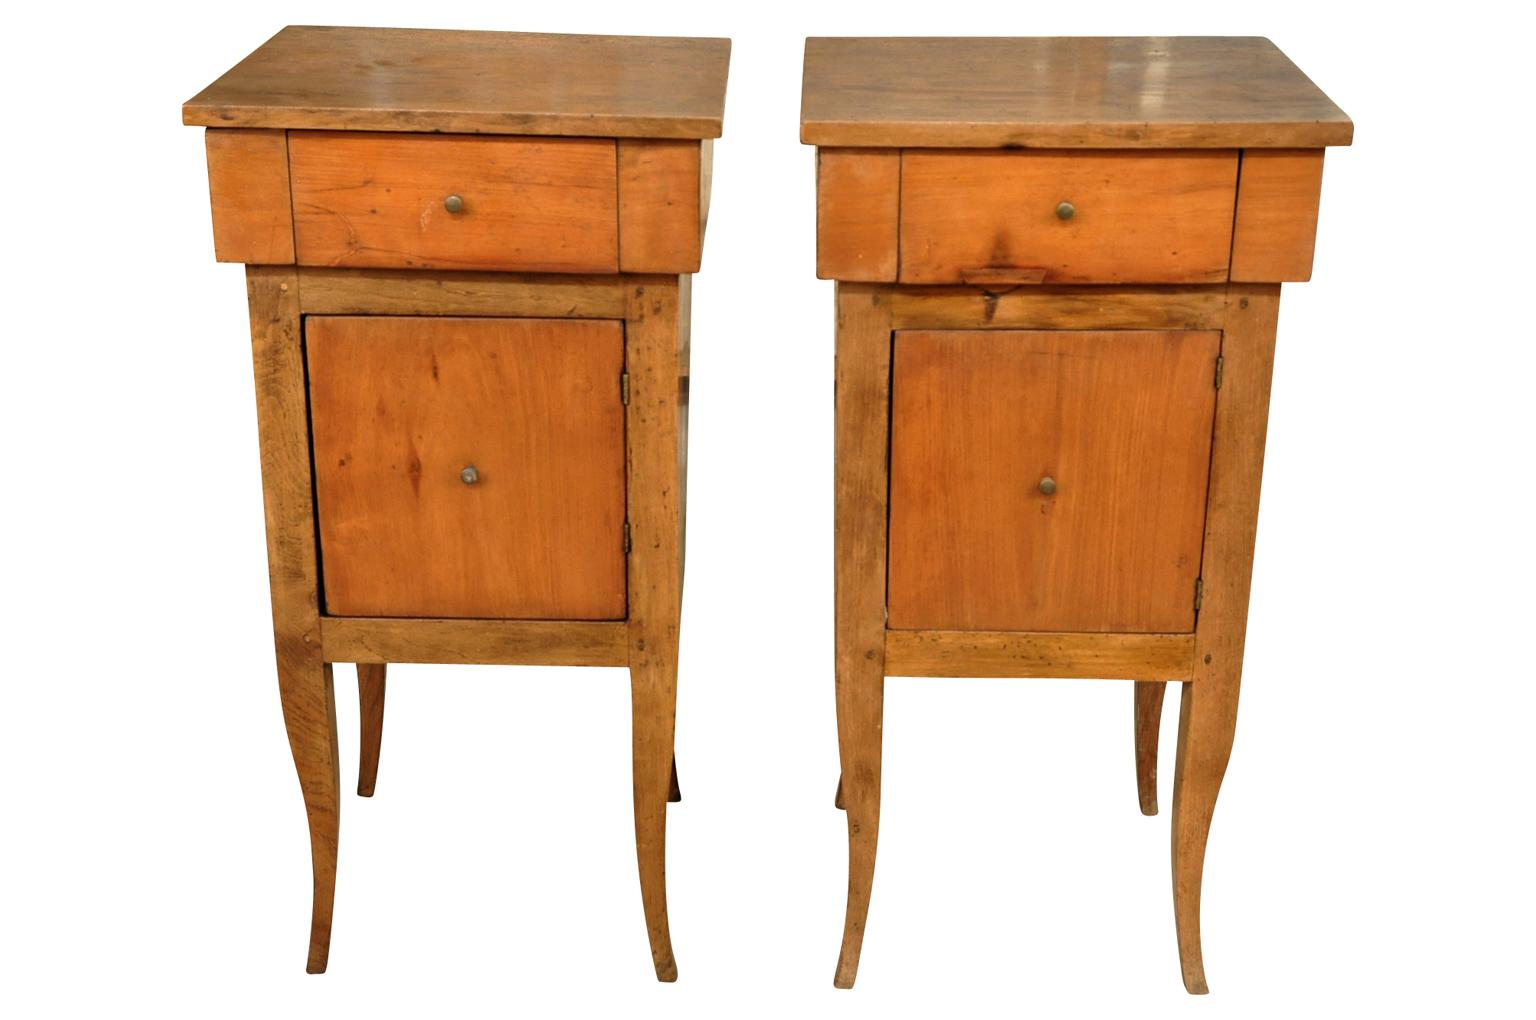 A sensational pair of later 19th century nightstands or side cabinets from the Veneto region of Italy. Handsomely constructed from fruitwood with a wonderful Minimalist form.